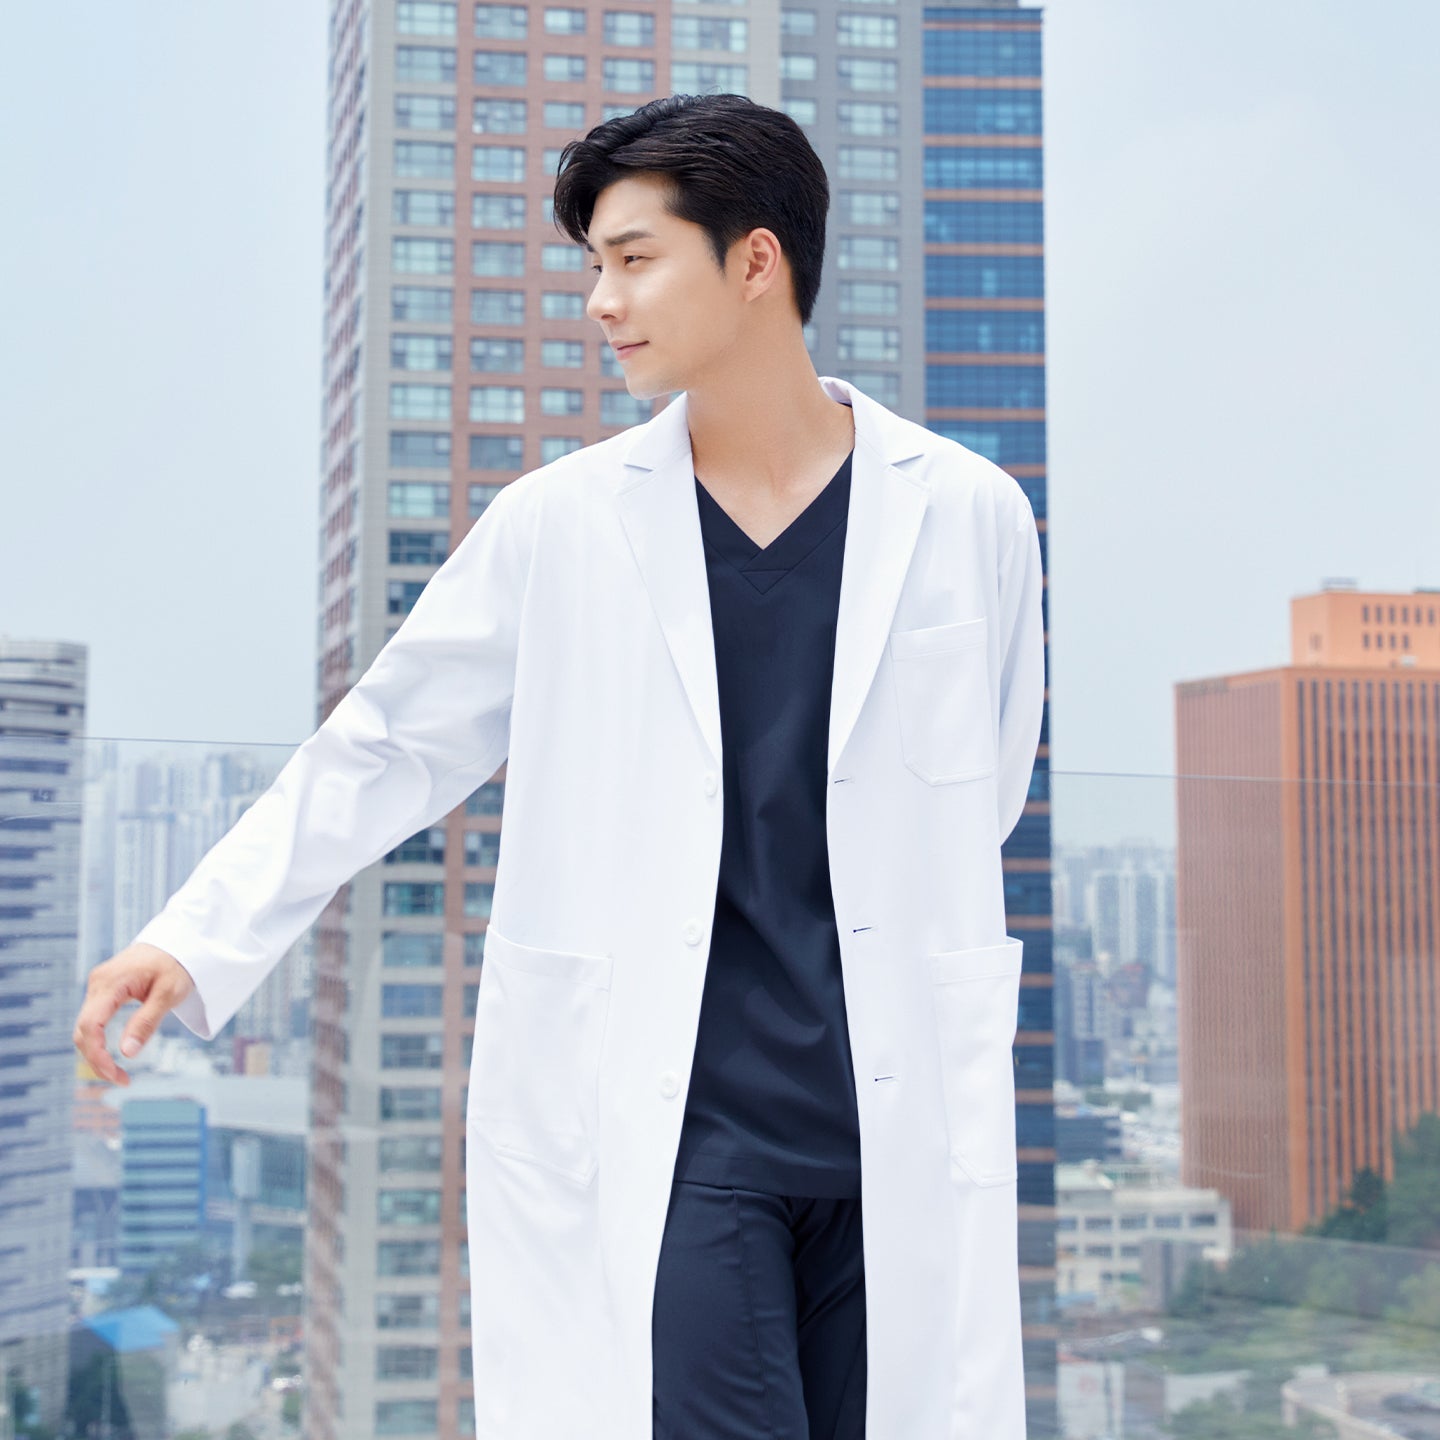 Man in a long lab coat over a front zipper scrub top with chest and side pockets, walking with a cityscape in the background,White